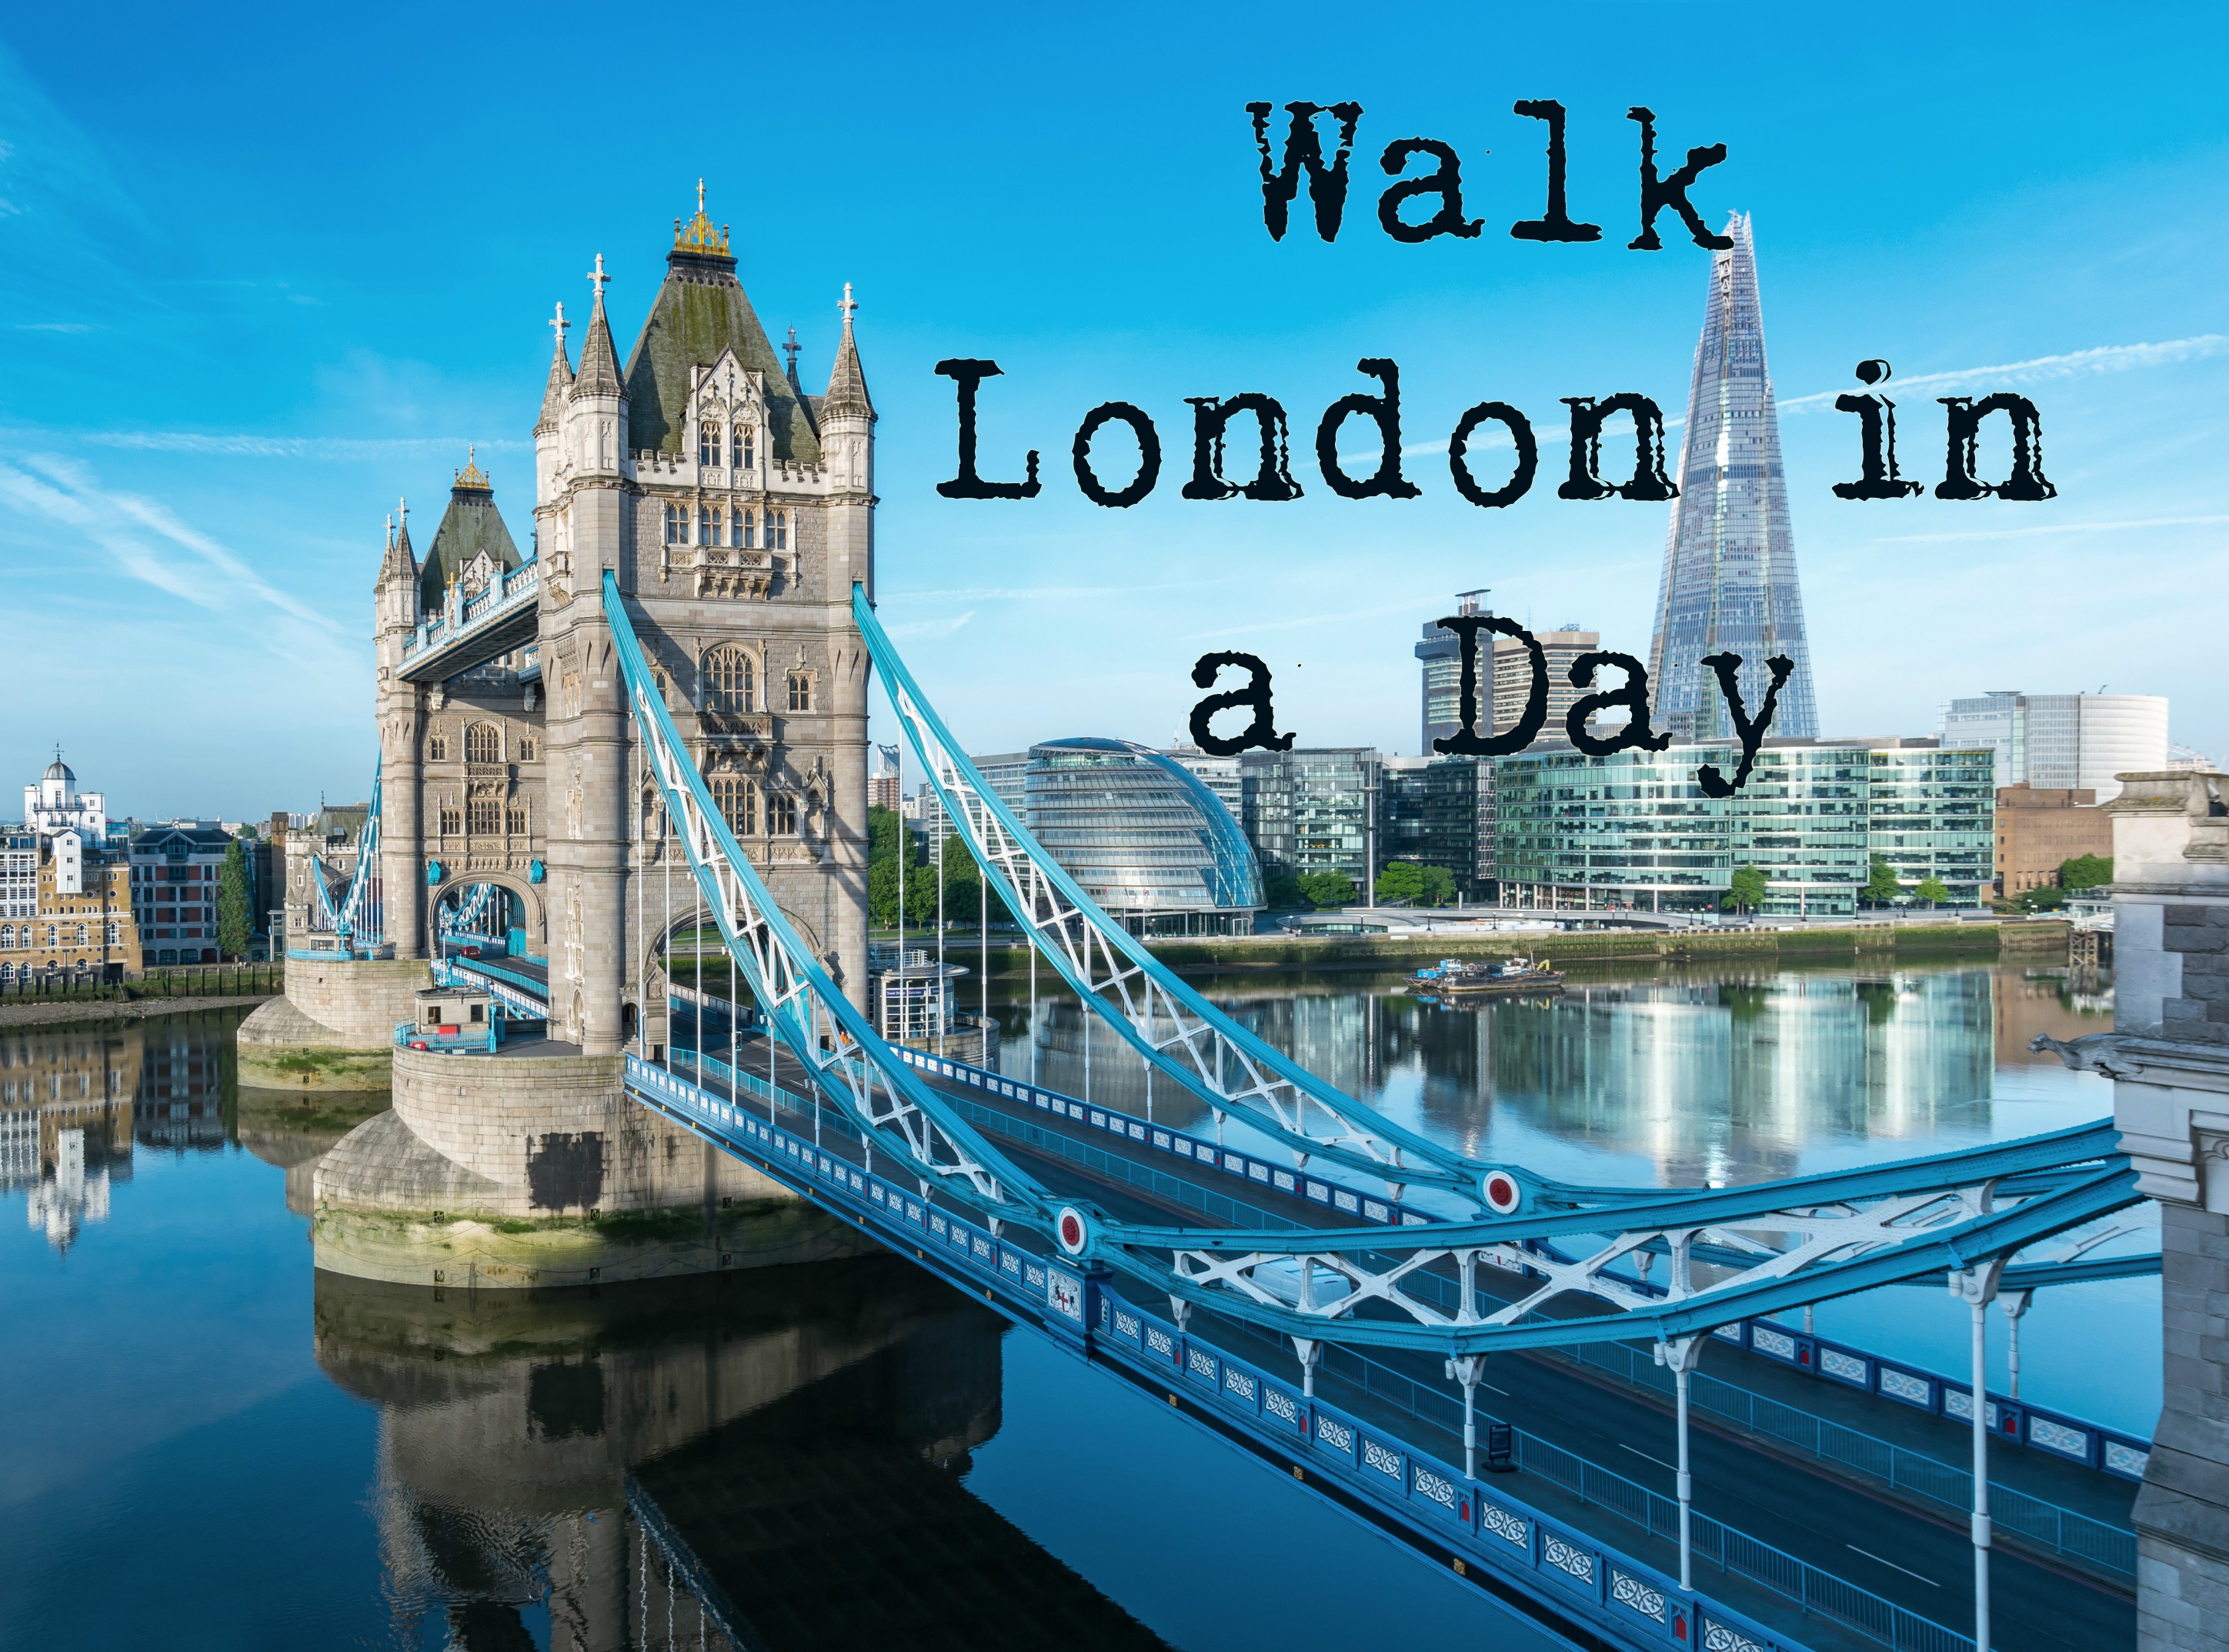 Photo of London Bridge from above, with the text 'Walk London in a Day'.